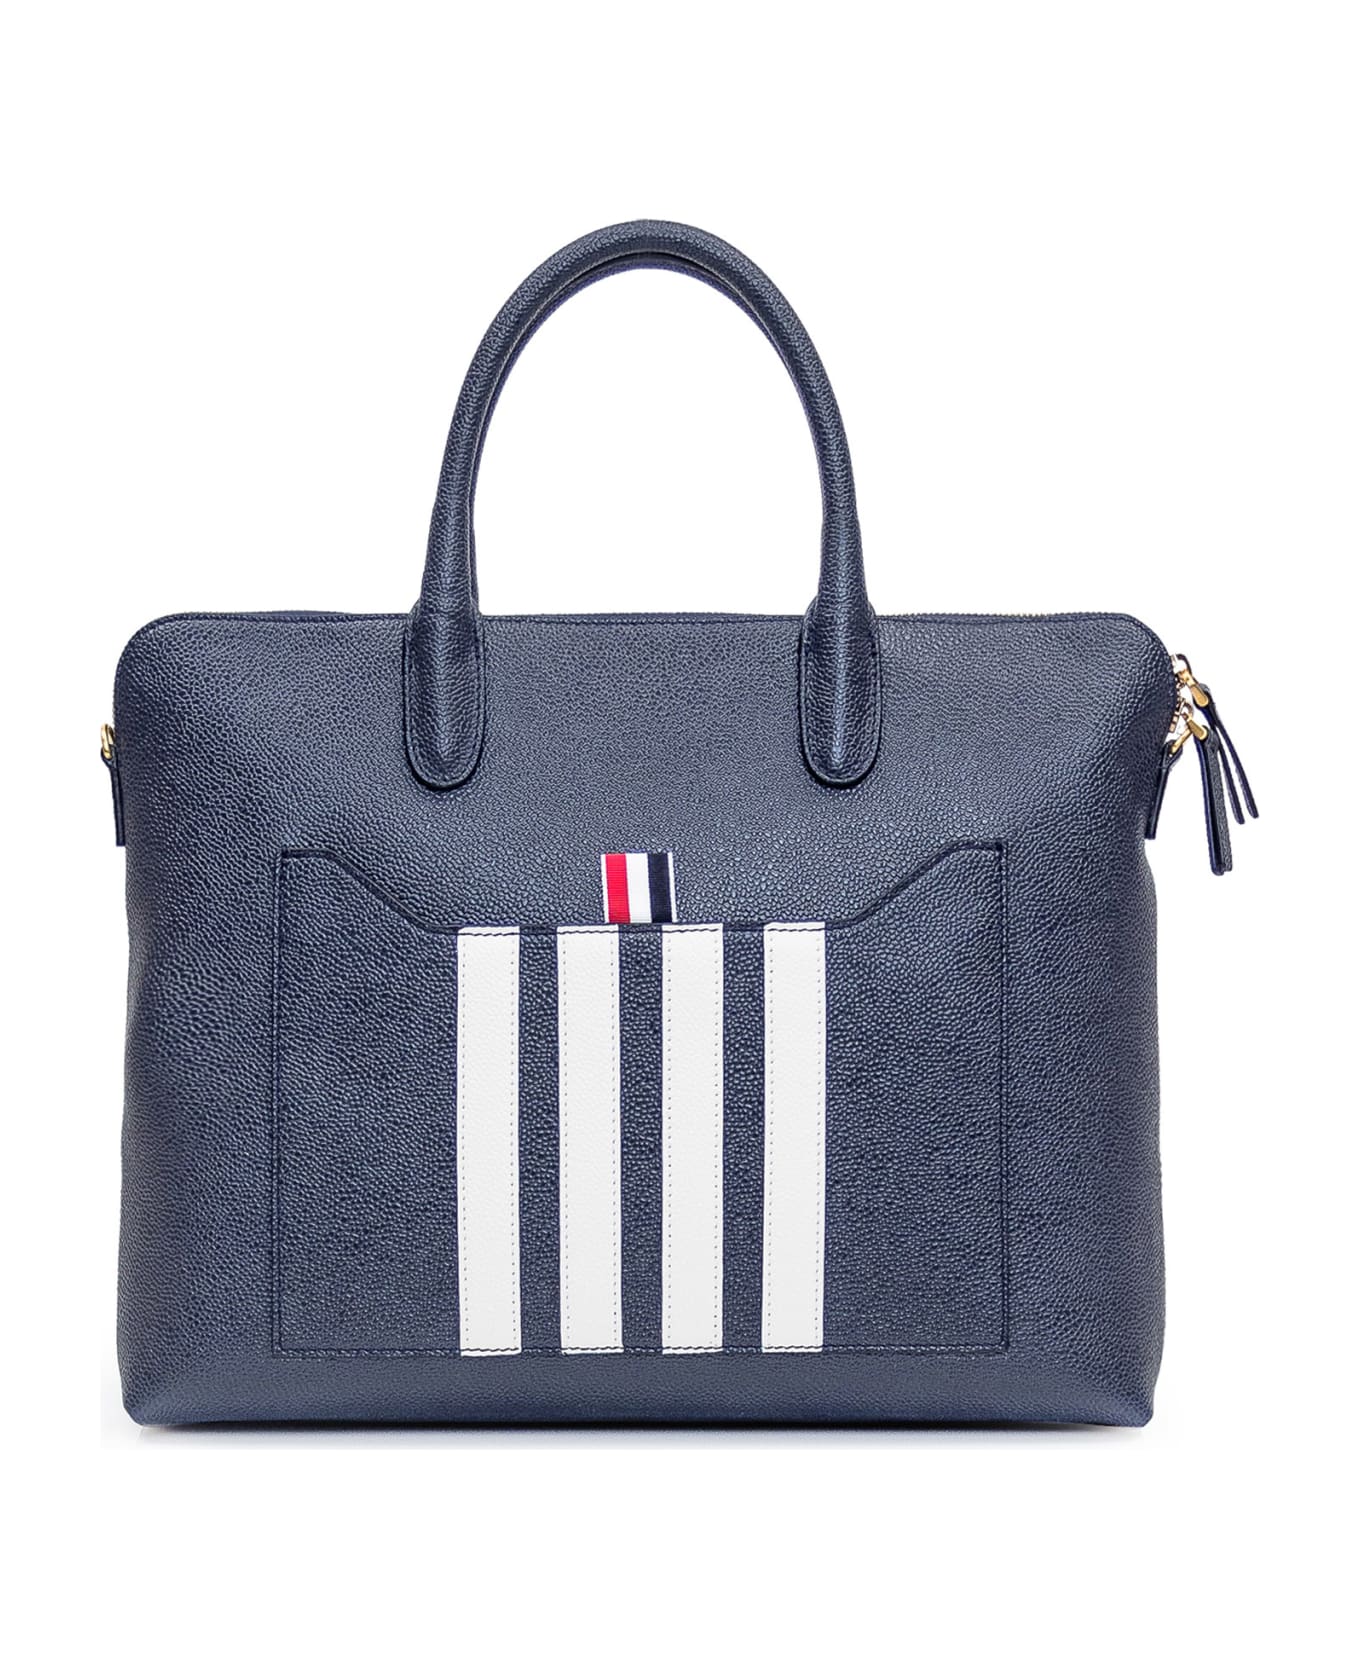 Thom Browne Bag With Logo - NAVY トートバッグ